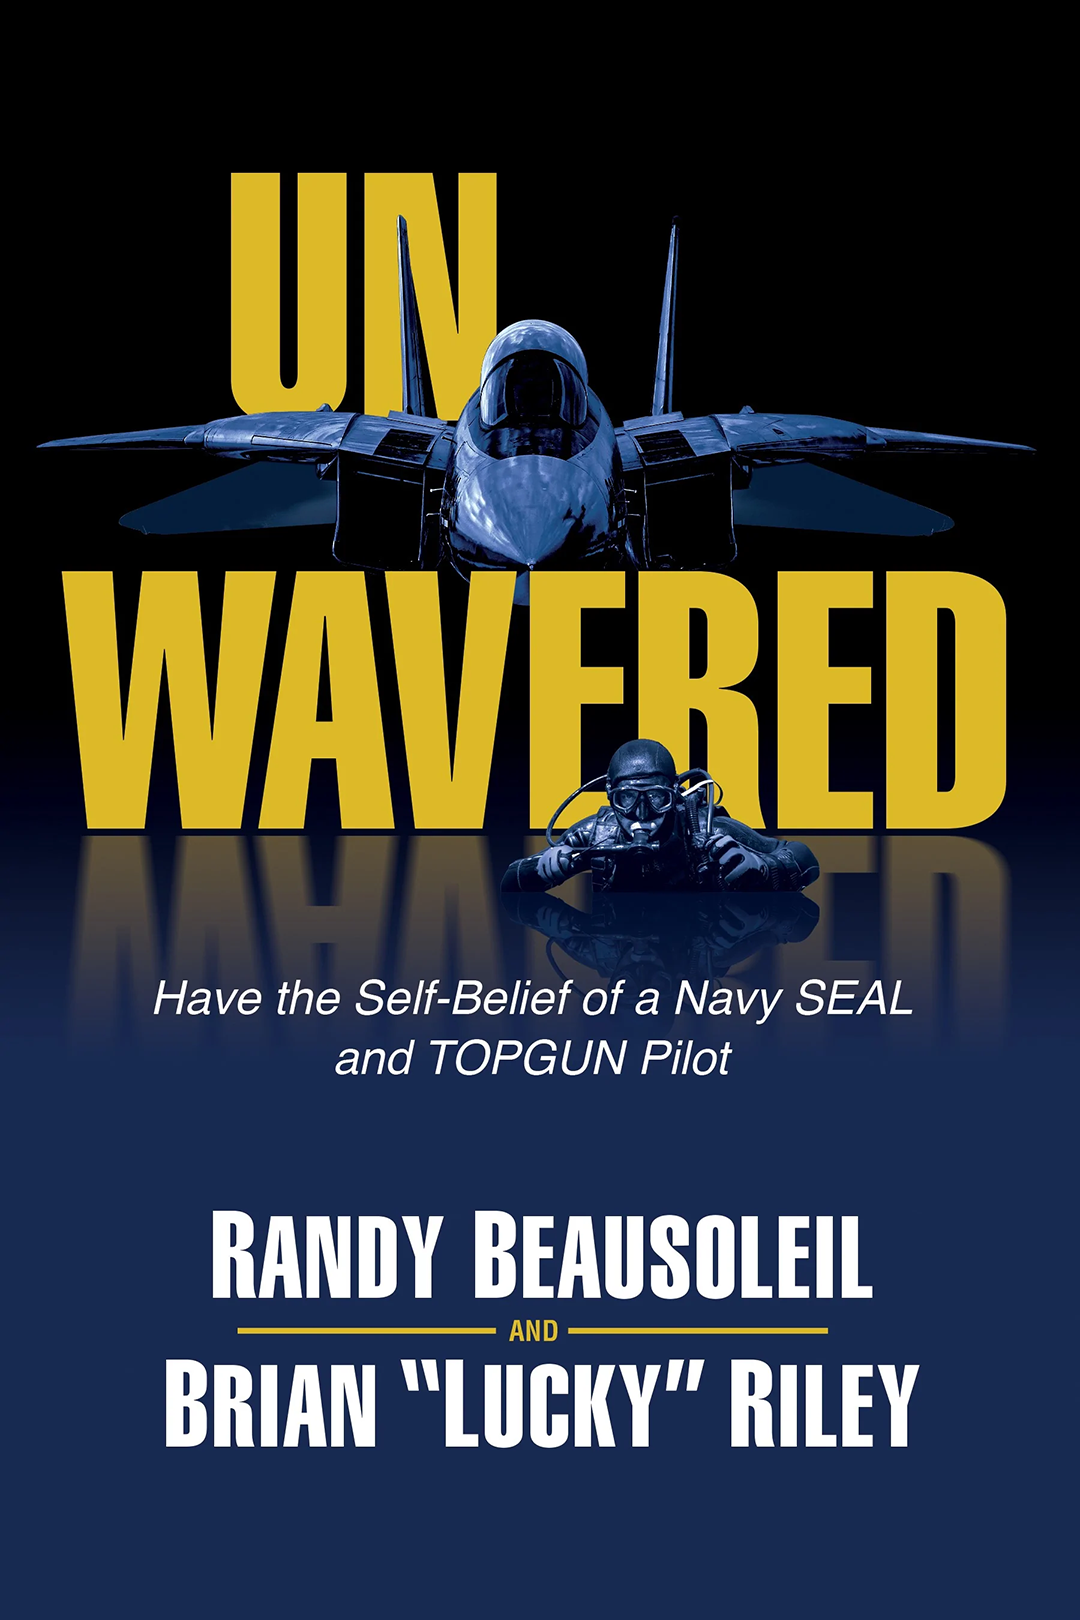 UNWAVERED - The Self-Belief of a Navy SEAL and a TOPGUN Pilot